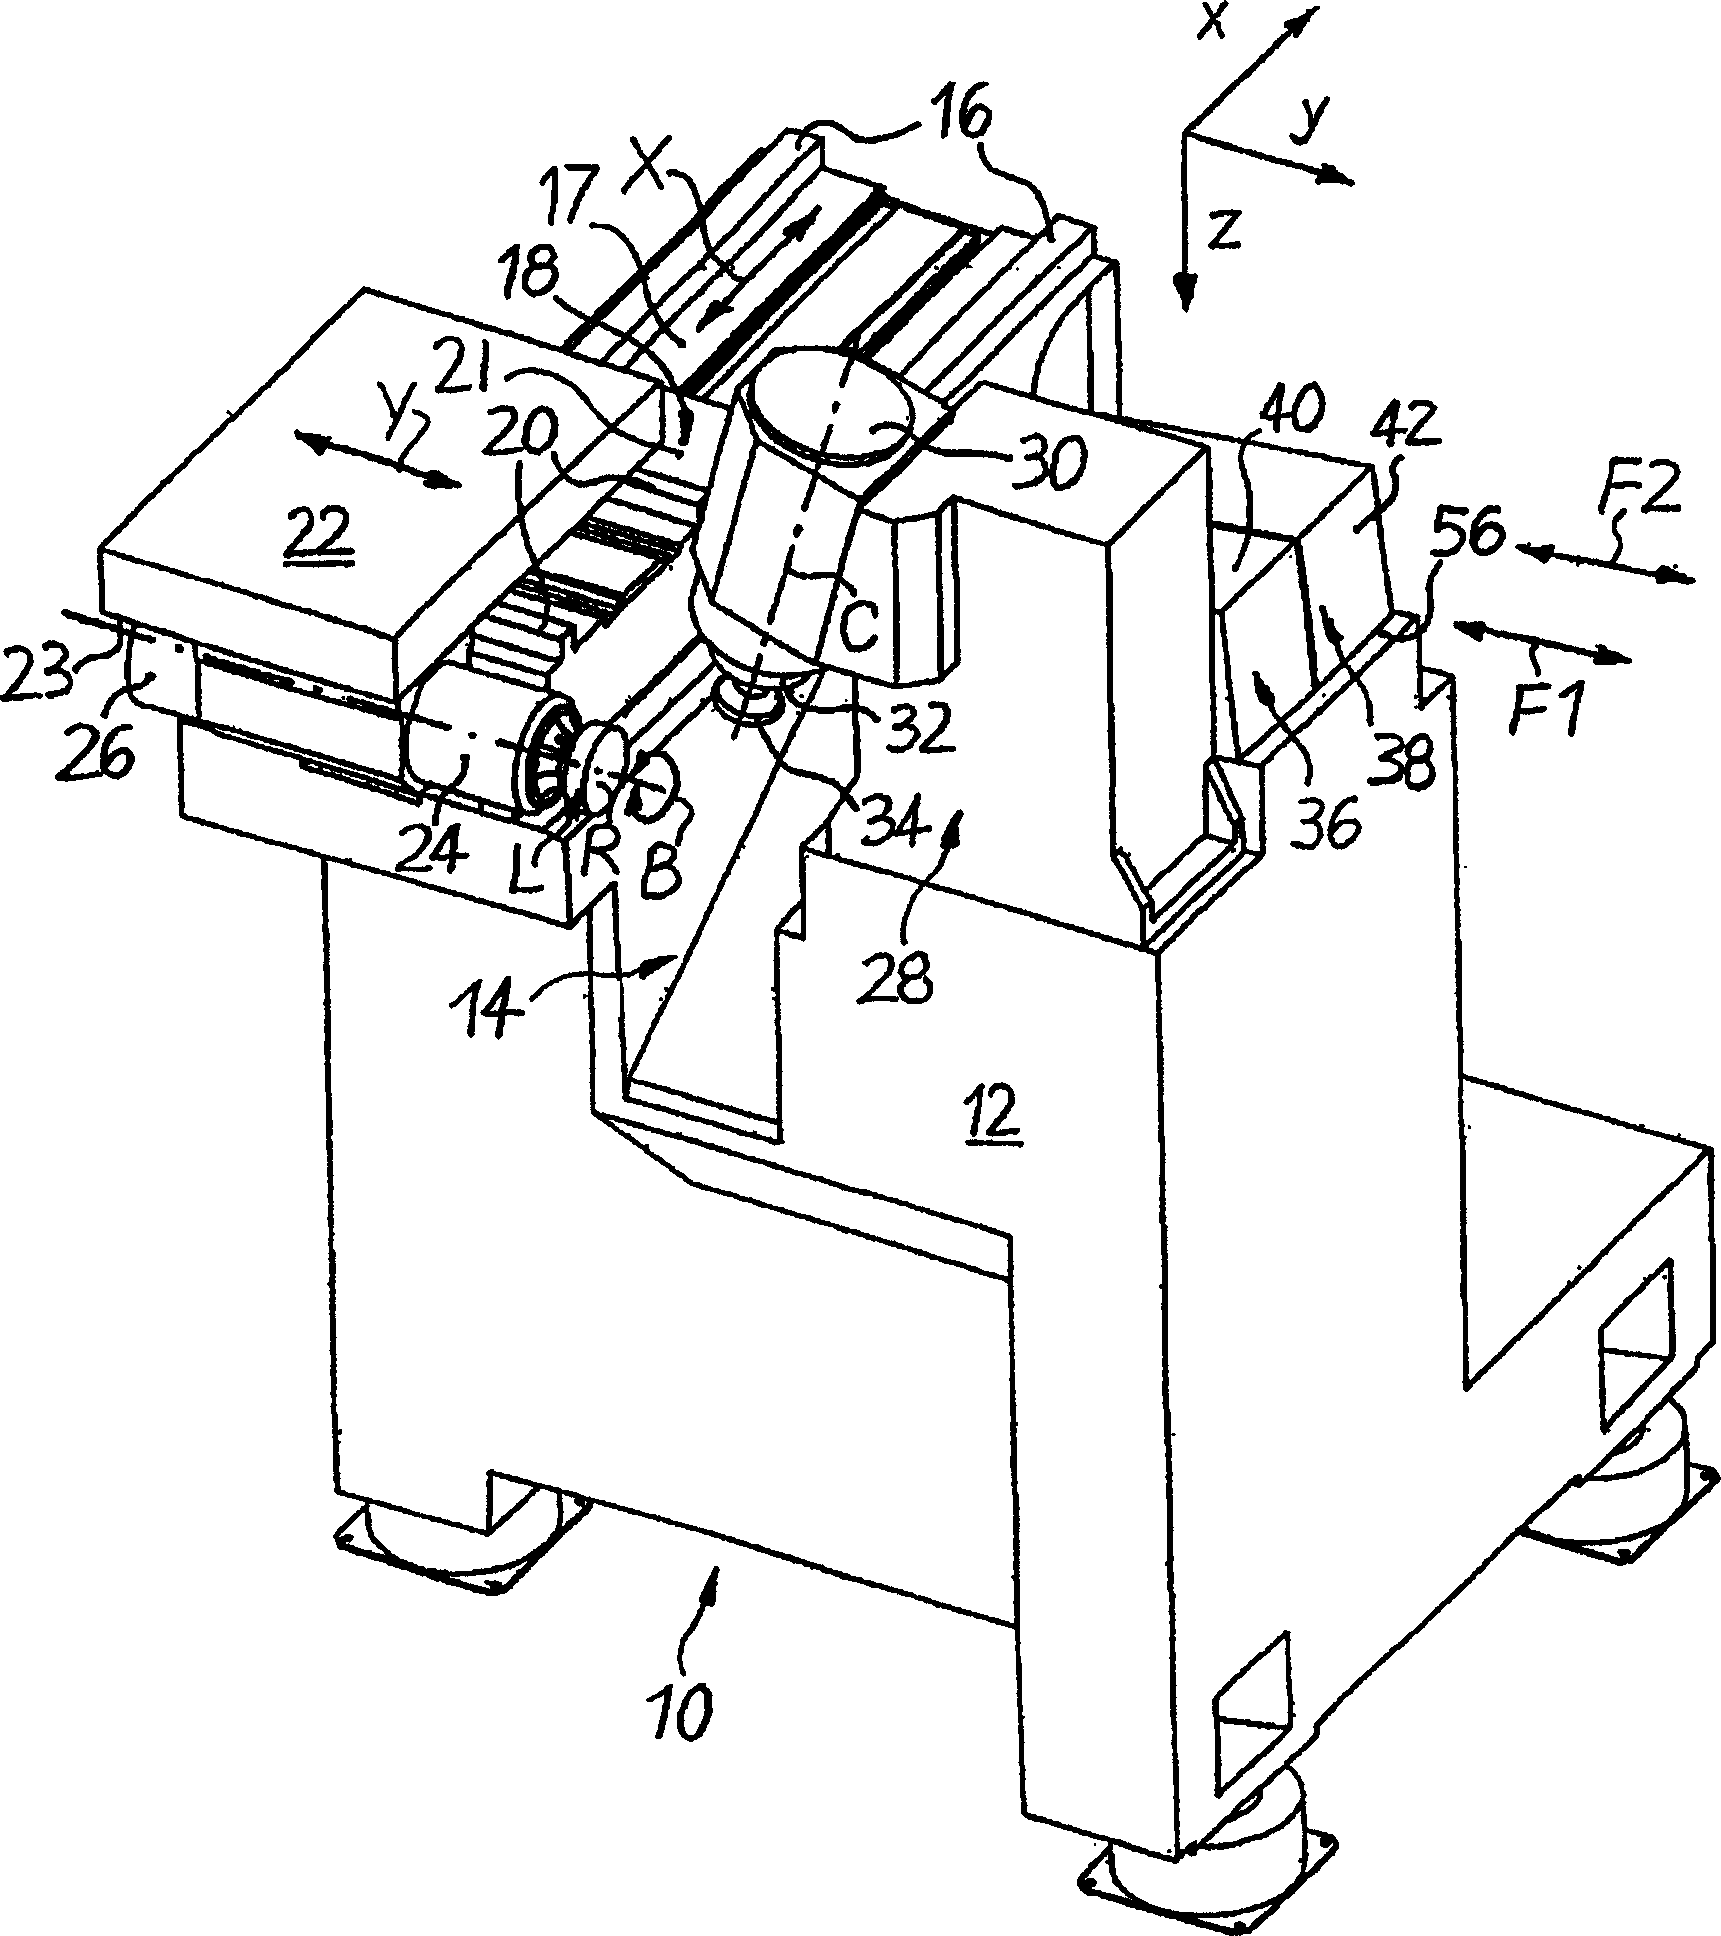 Machine for grinding optical workpieces, in particular plastic eyeglass lenses